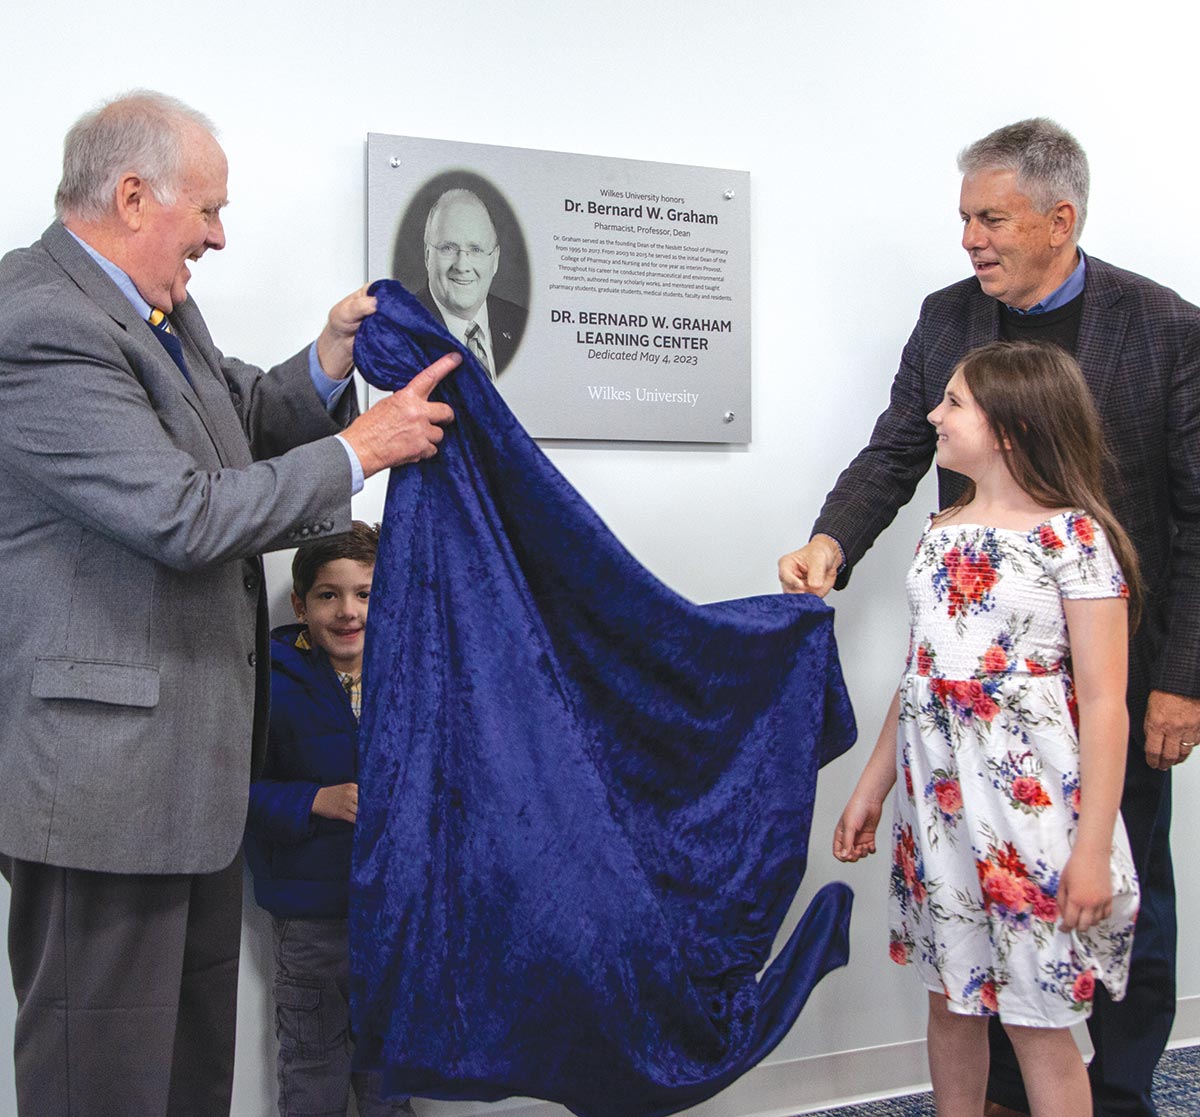 Dr. Bernard W. Graham unveils the plaque in the Graham Learning Center building at Wilkes University with the help of another man and two other children nearby him